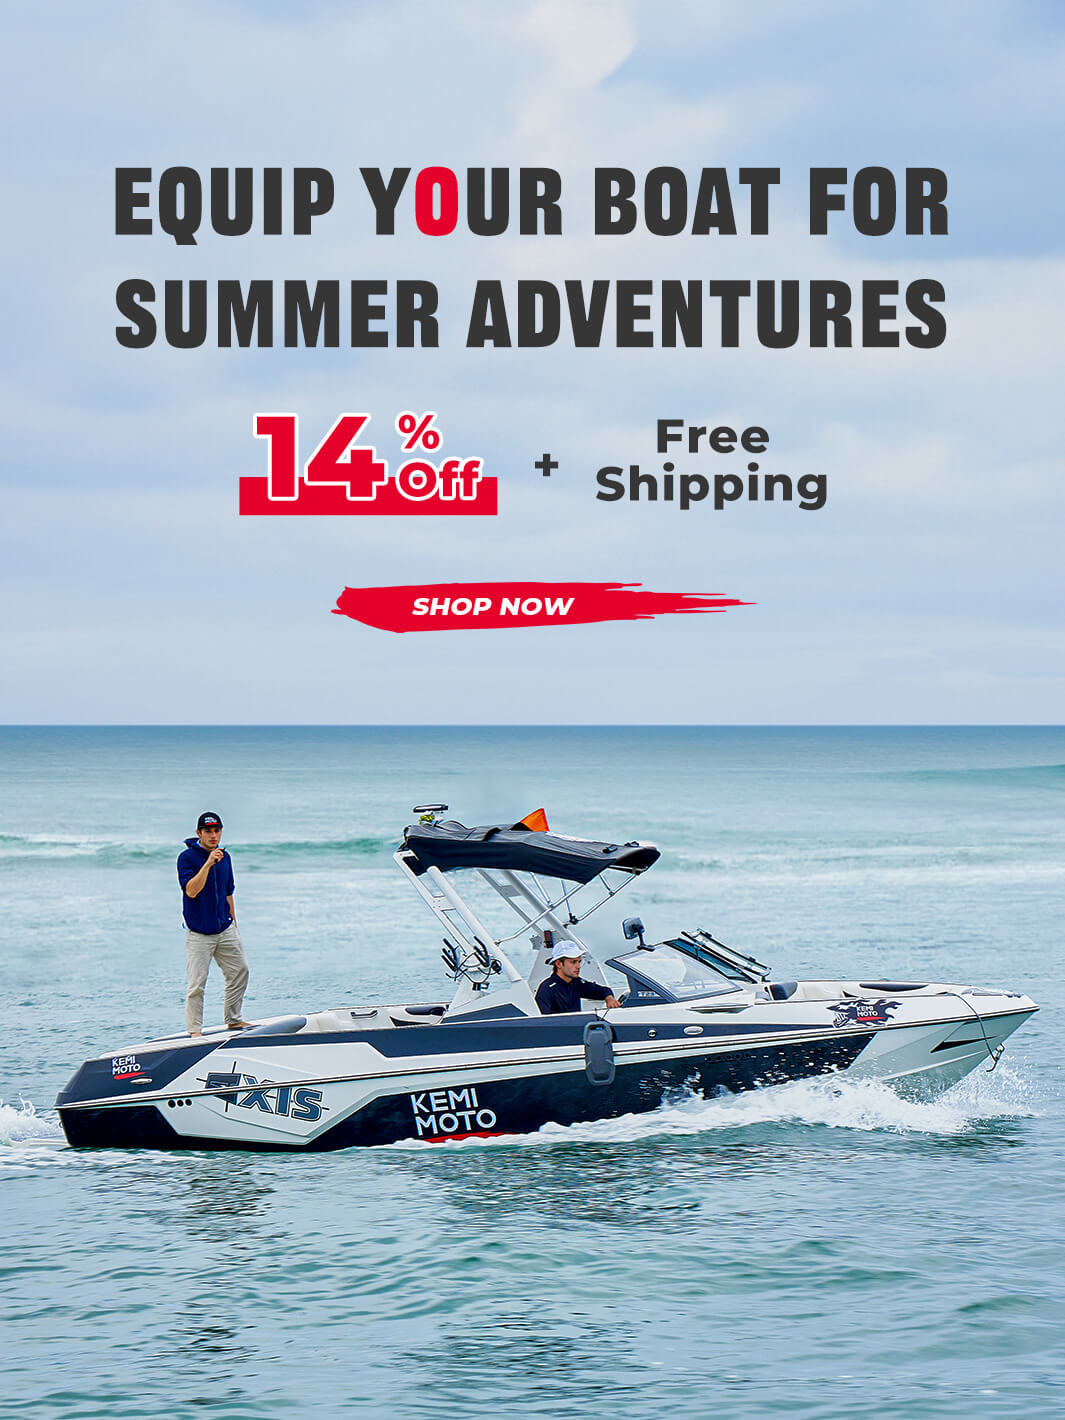 Equip Your Boat for Summer Adventures - 14%off